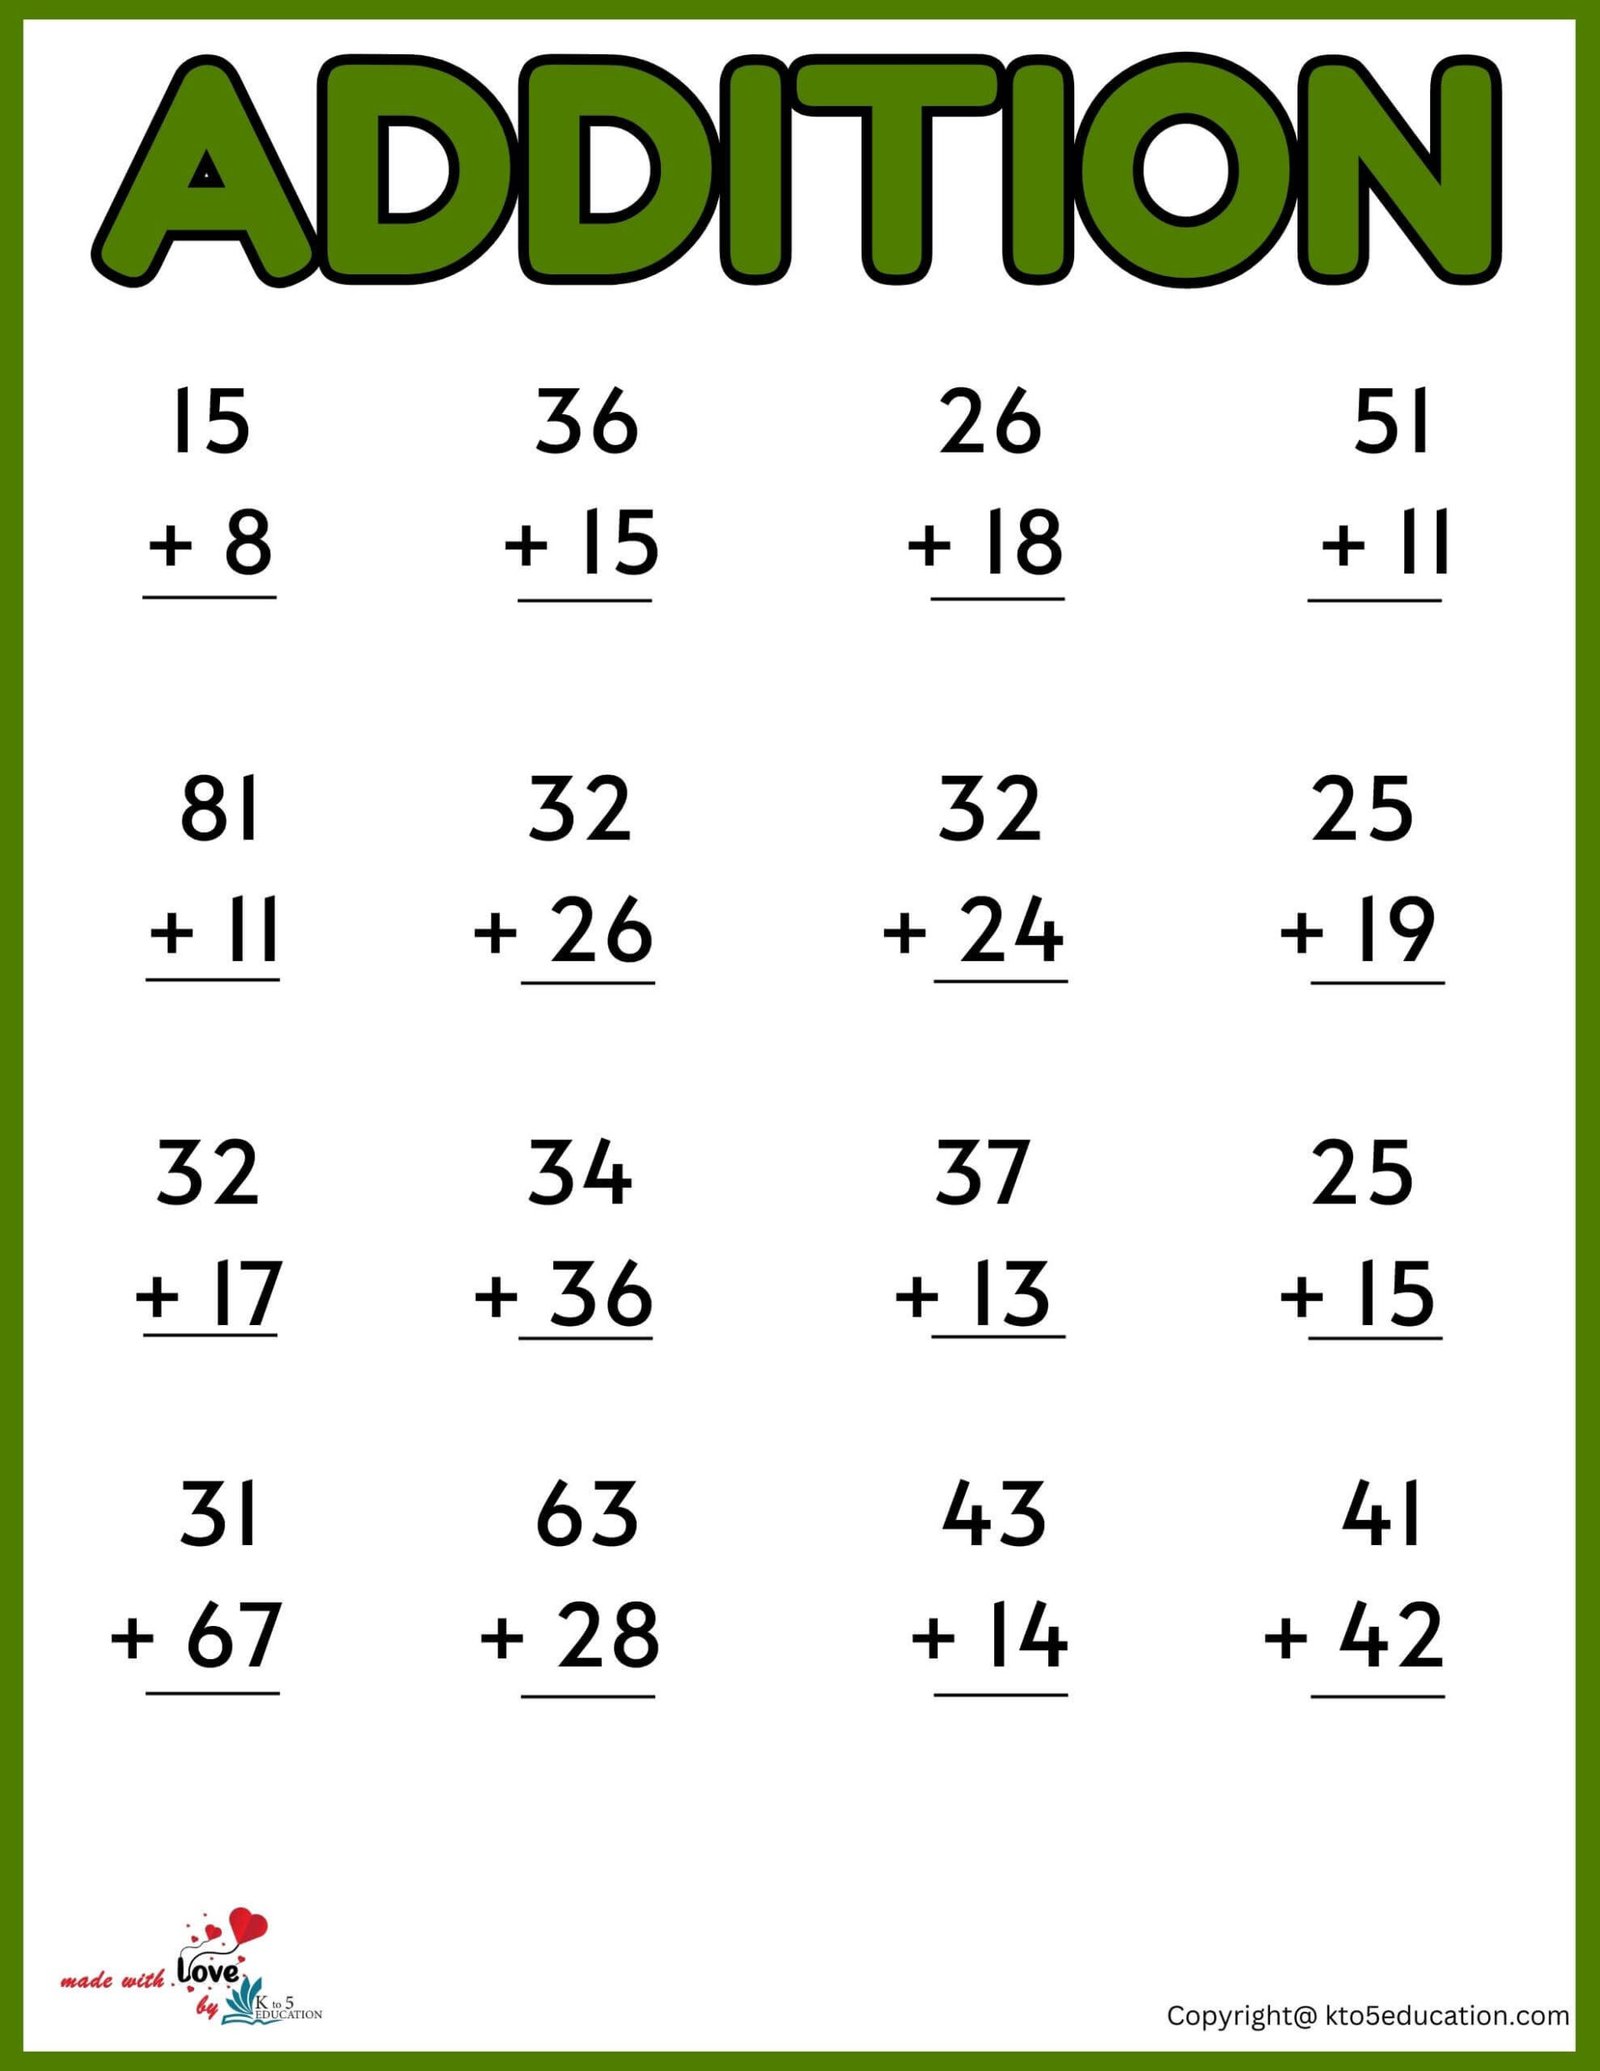 addition-worksheet-for-online-activities-free-download